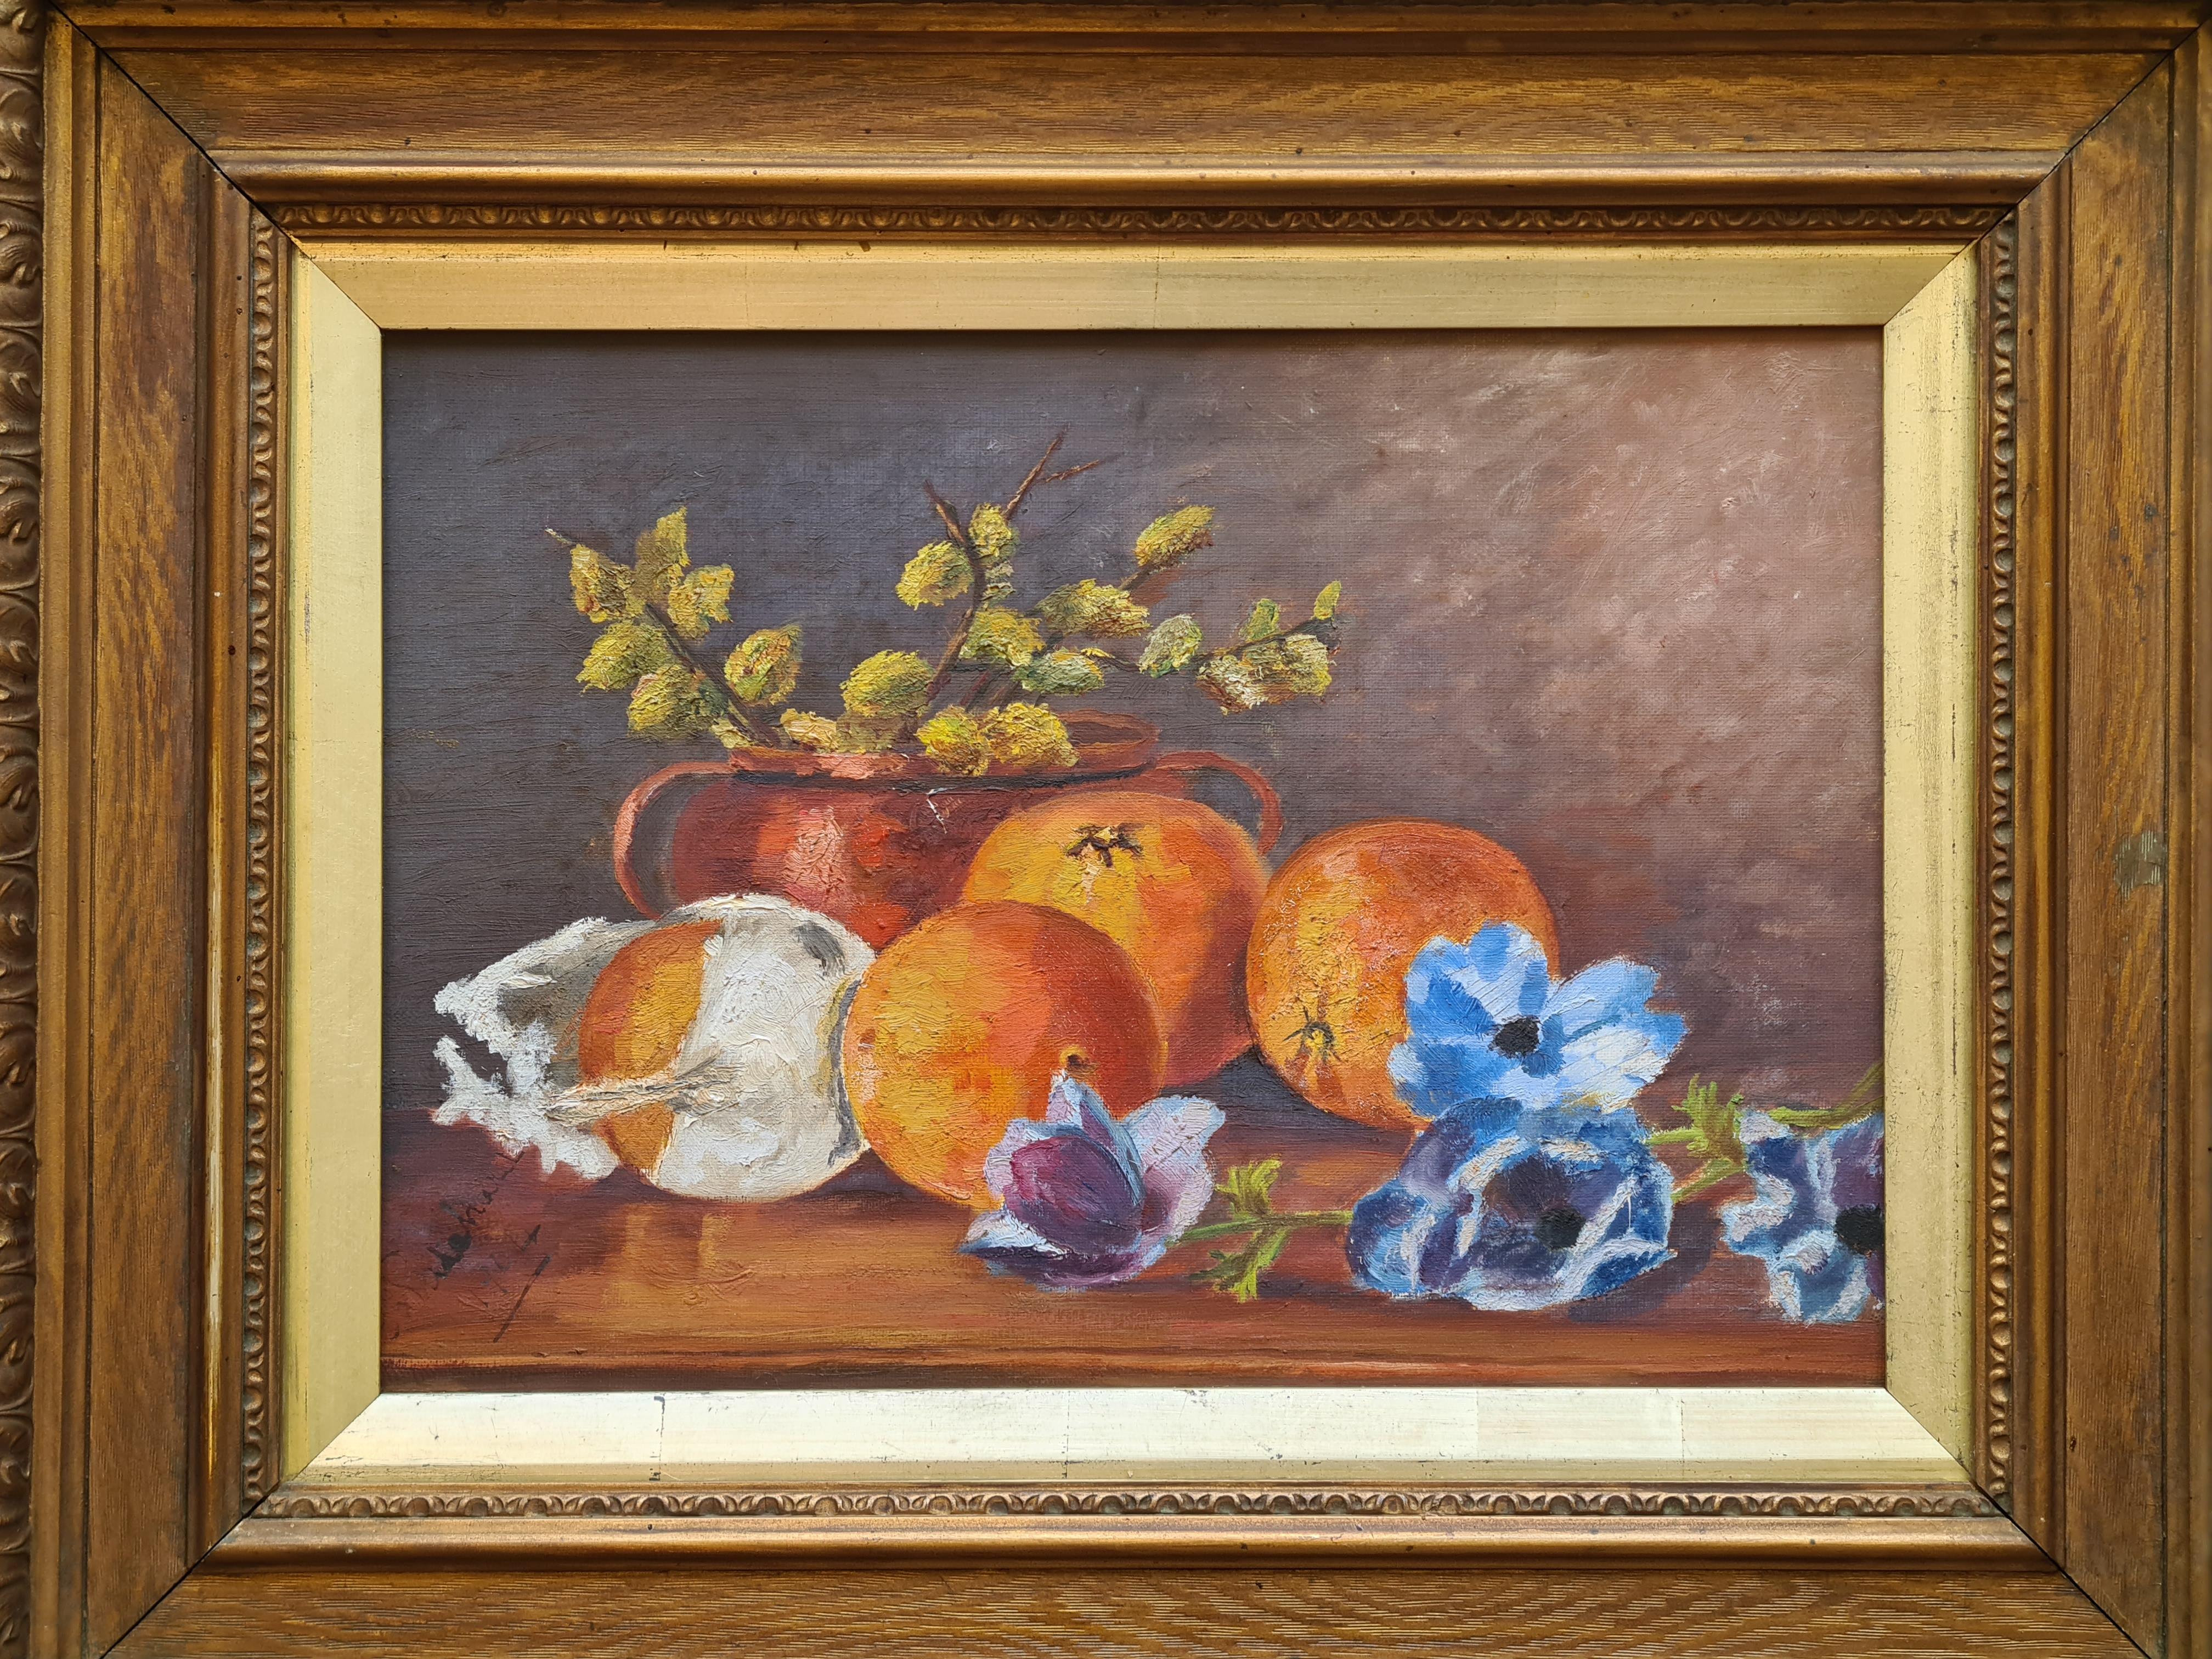 Early 20thC Oil on Canvas Still Life, Autumn Harvest, Oranges, Hops and Flowers - Painting by E Pritchard